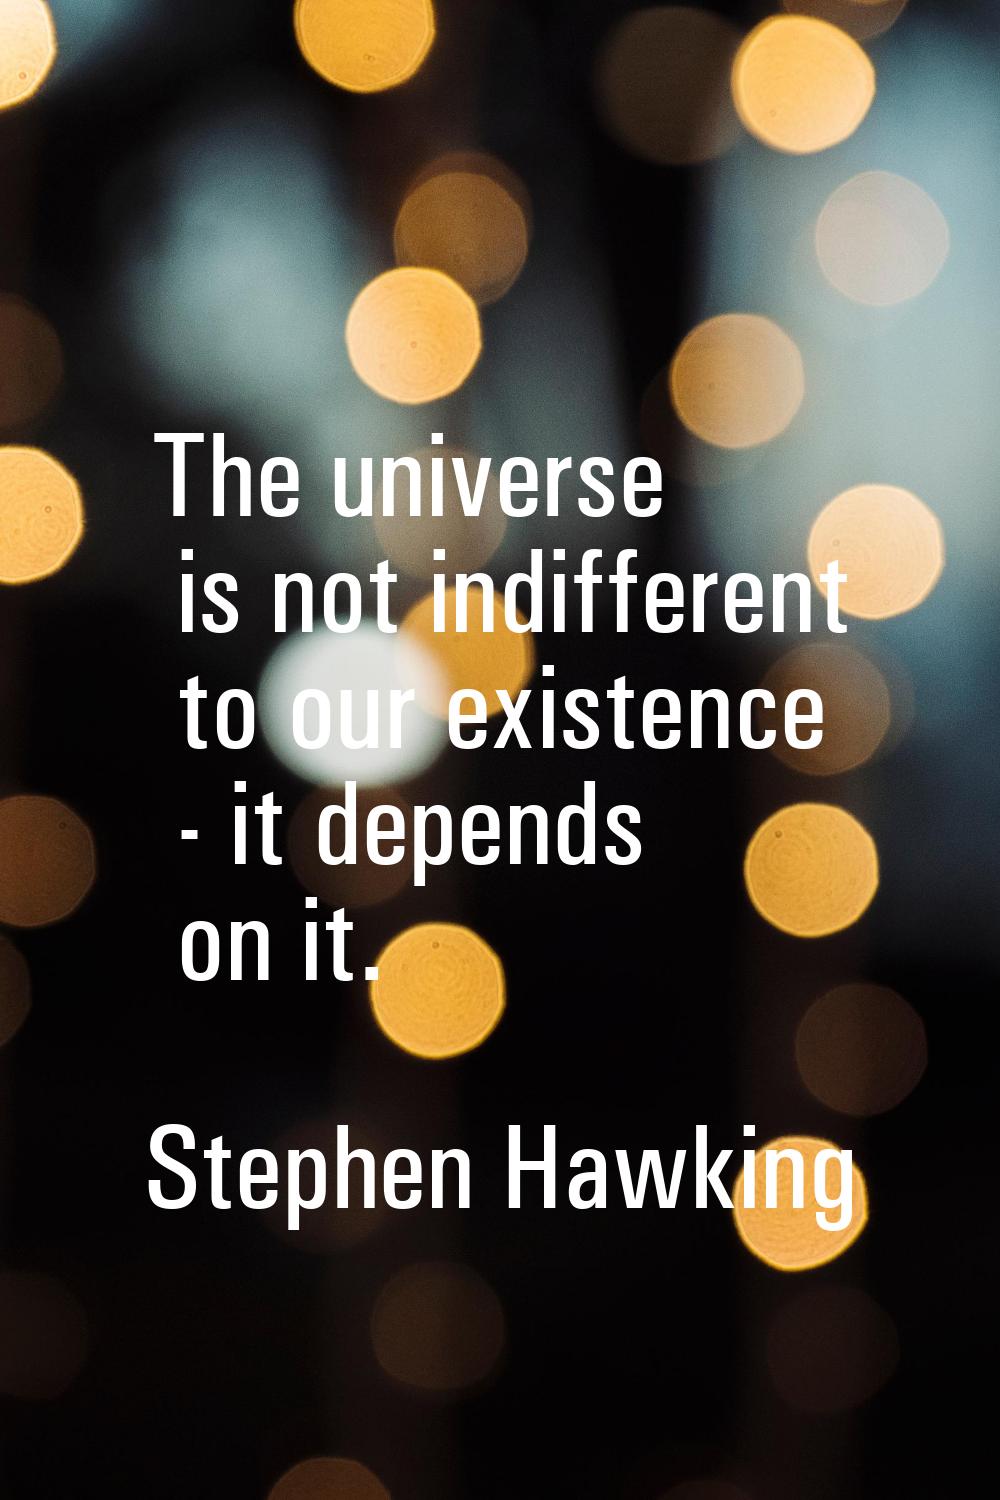 The universe is not indifferent to our existence - it depends on it.